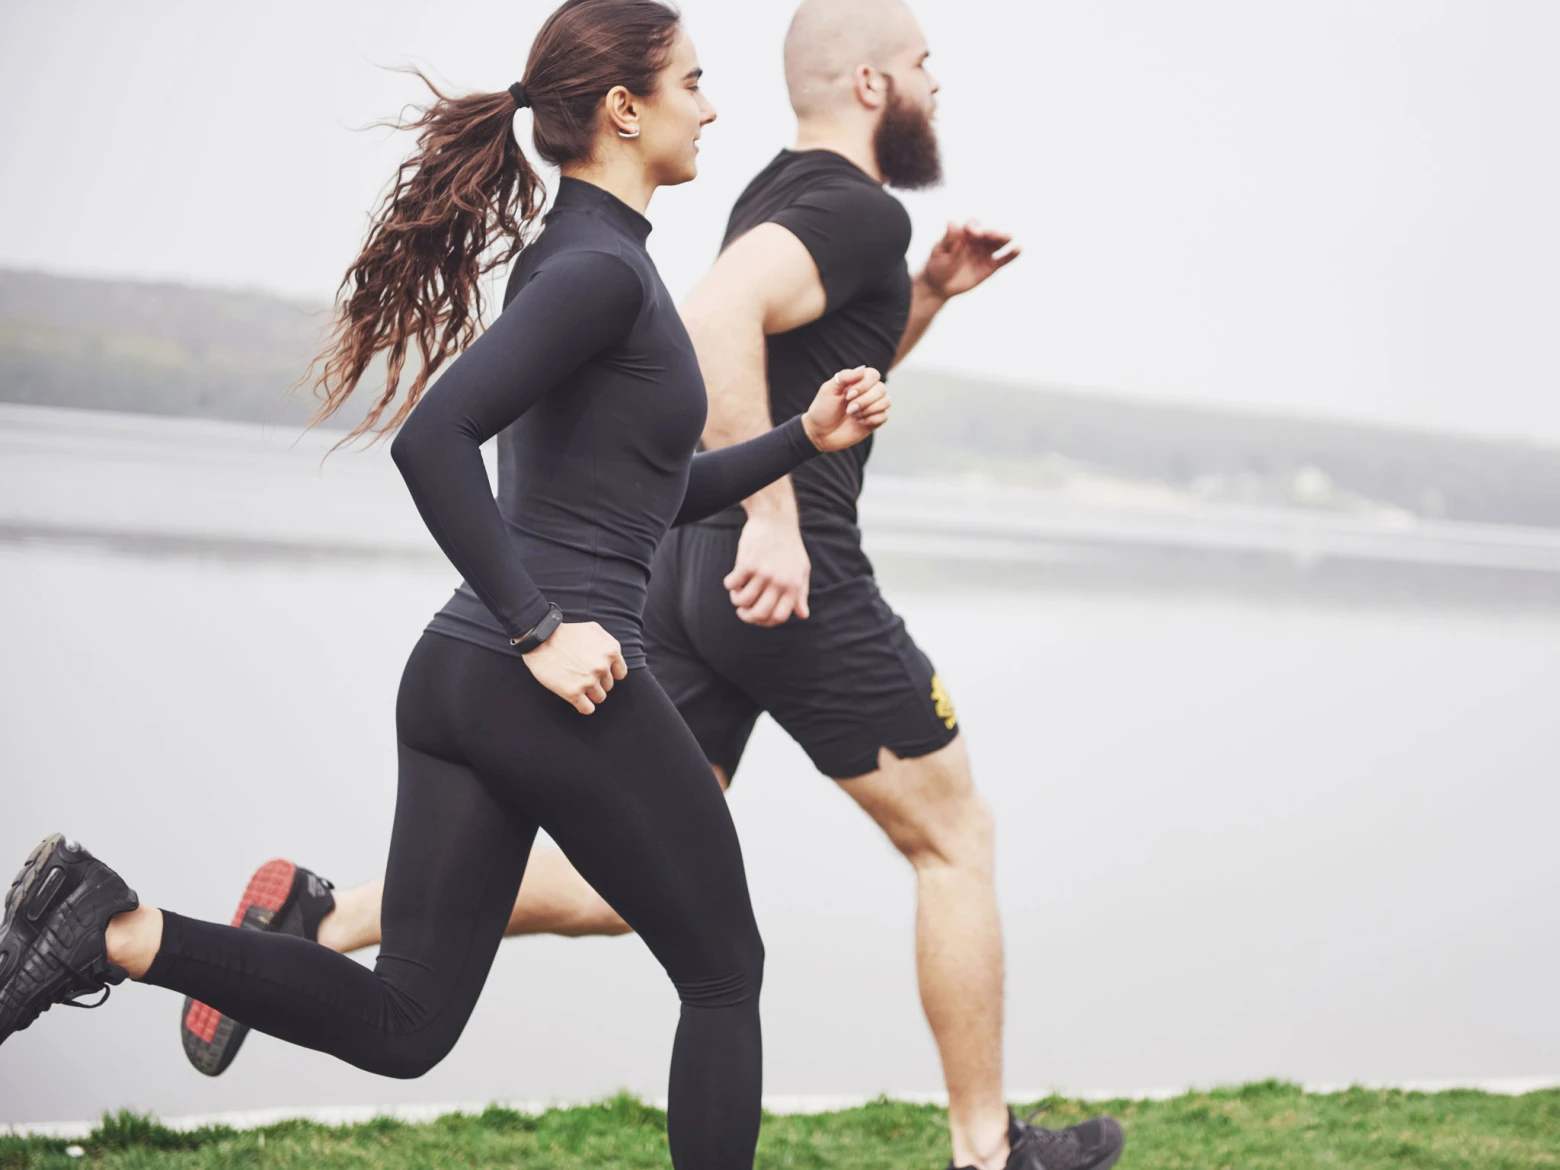 https://images.panomnom.com/upload/v1656658440/ST%20BLOGS/Jogging%20Benefits/couple-jogging-running-outdoors-park-near-water-young-bearded-man-woman-exercising-together-morning_s1a6dt.jpg?dpr=2.625&bv=2&height=450&webp=true